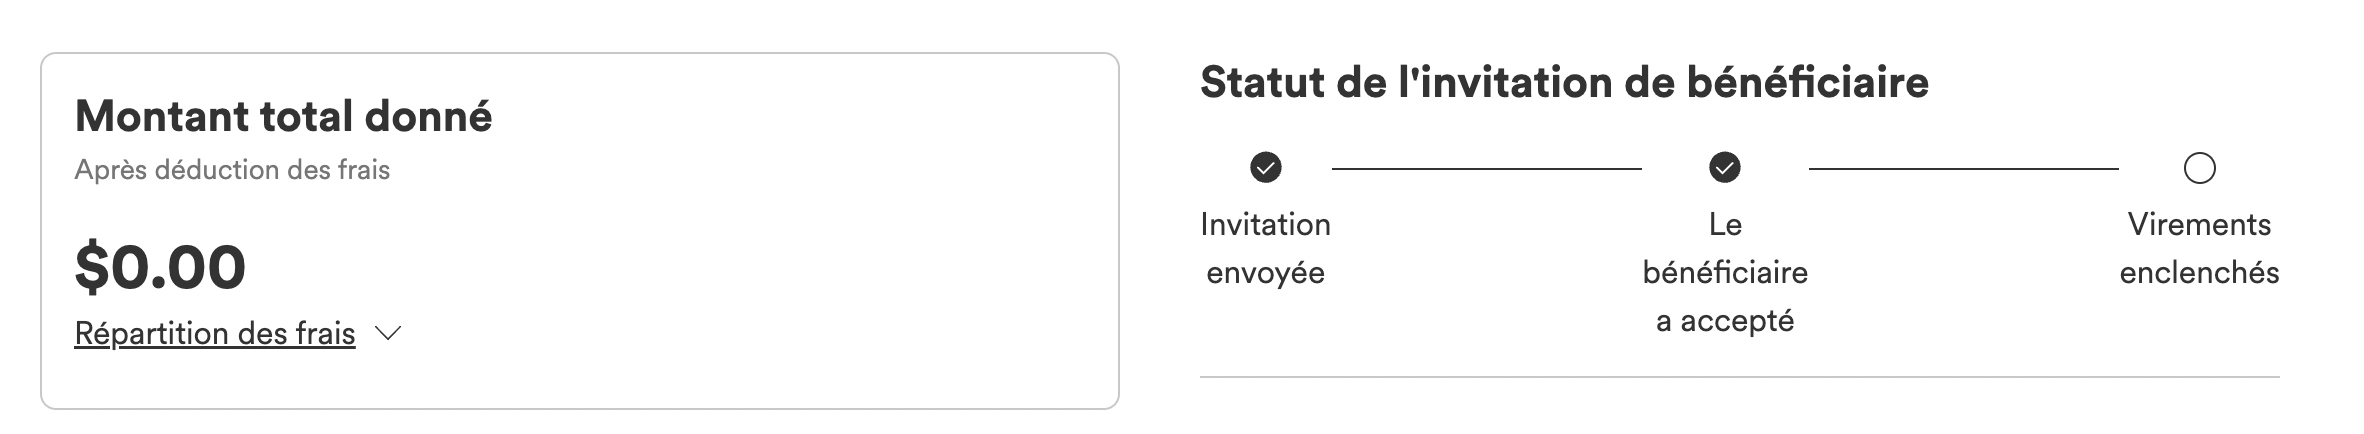 BeneInvite_fr.png